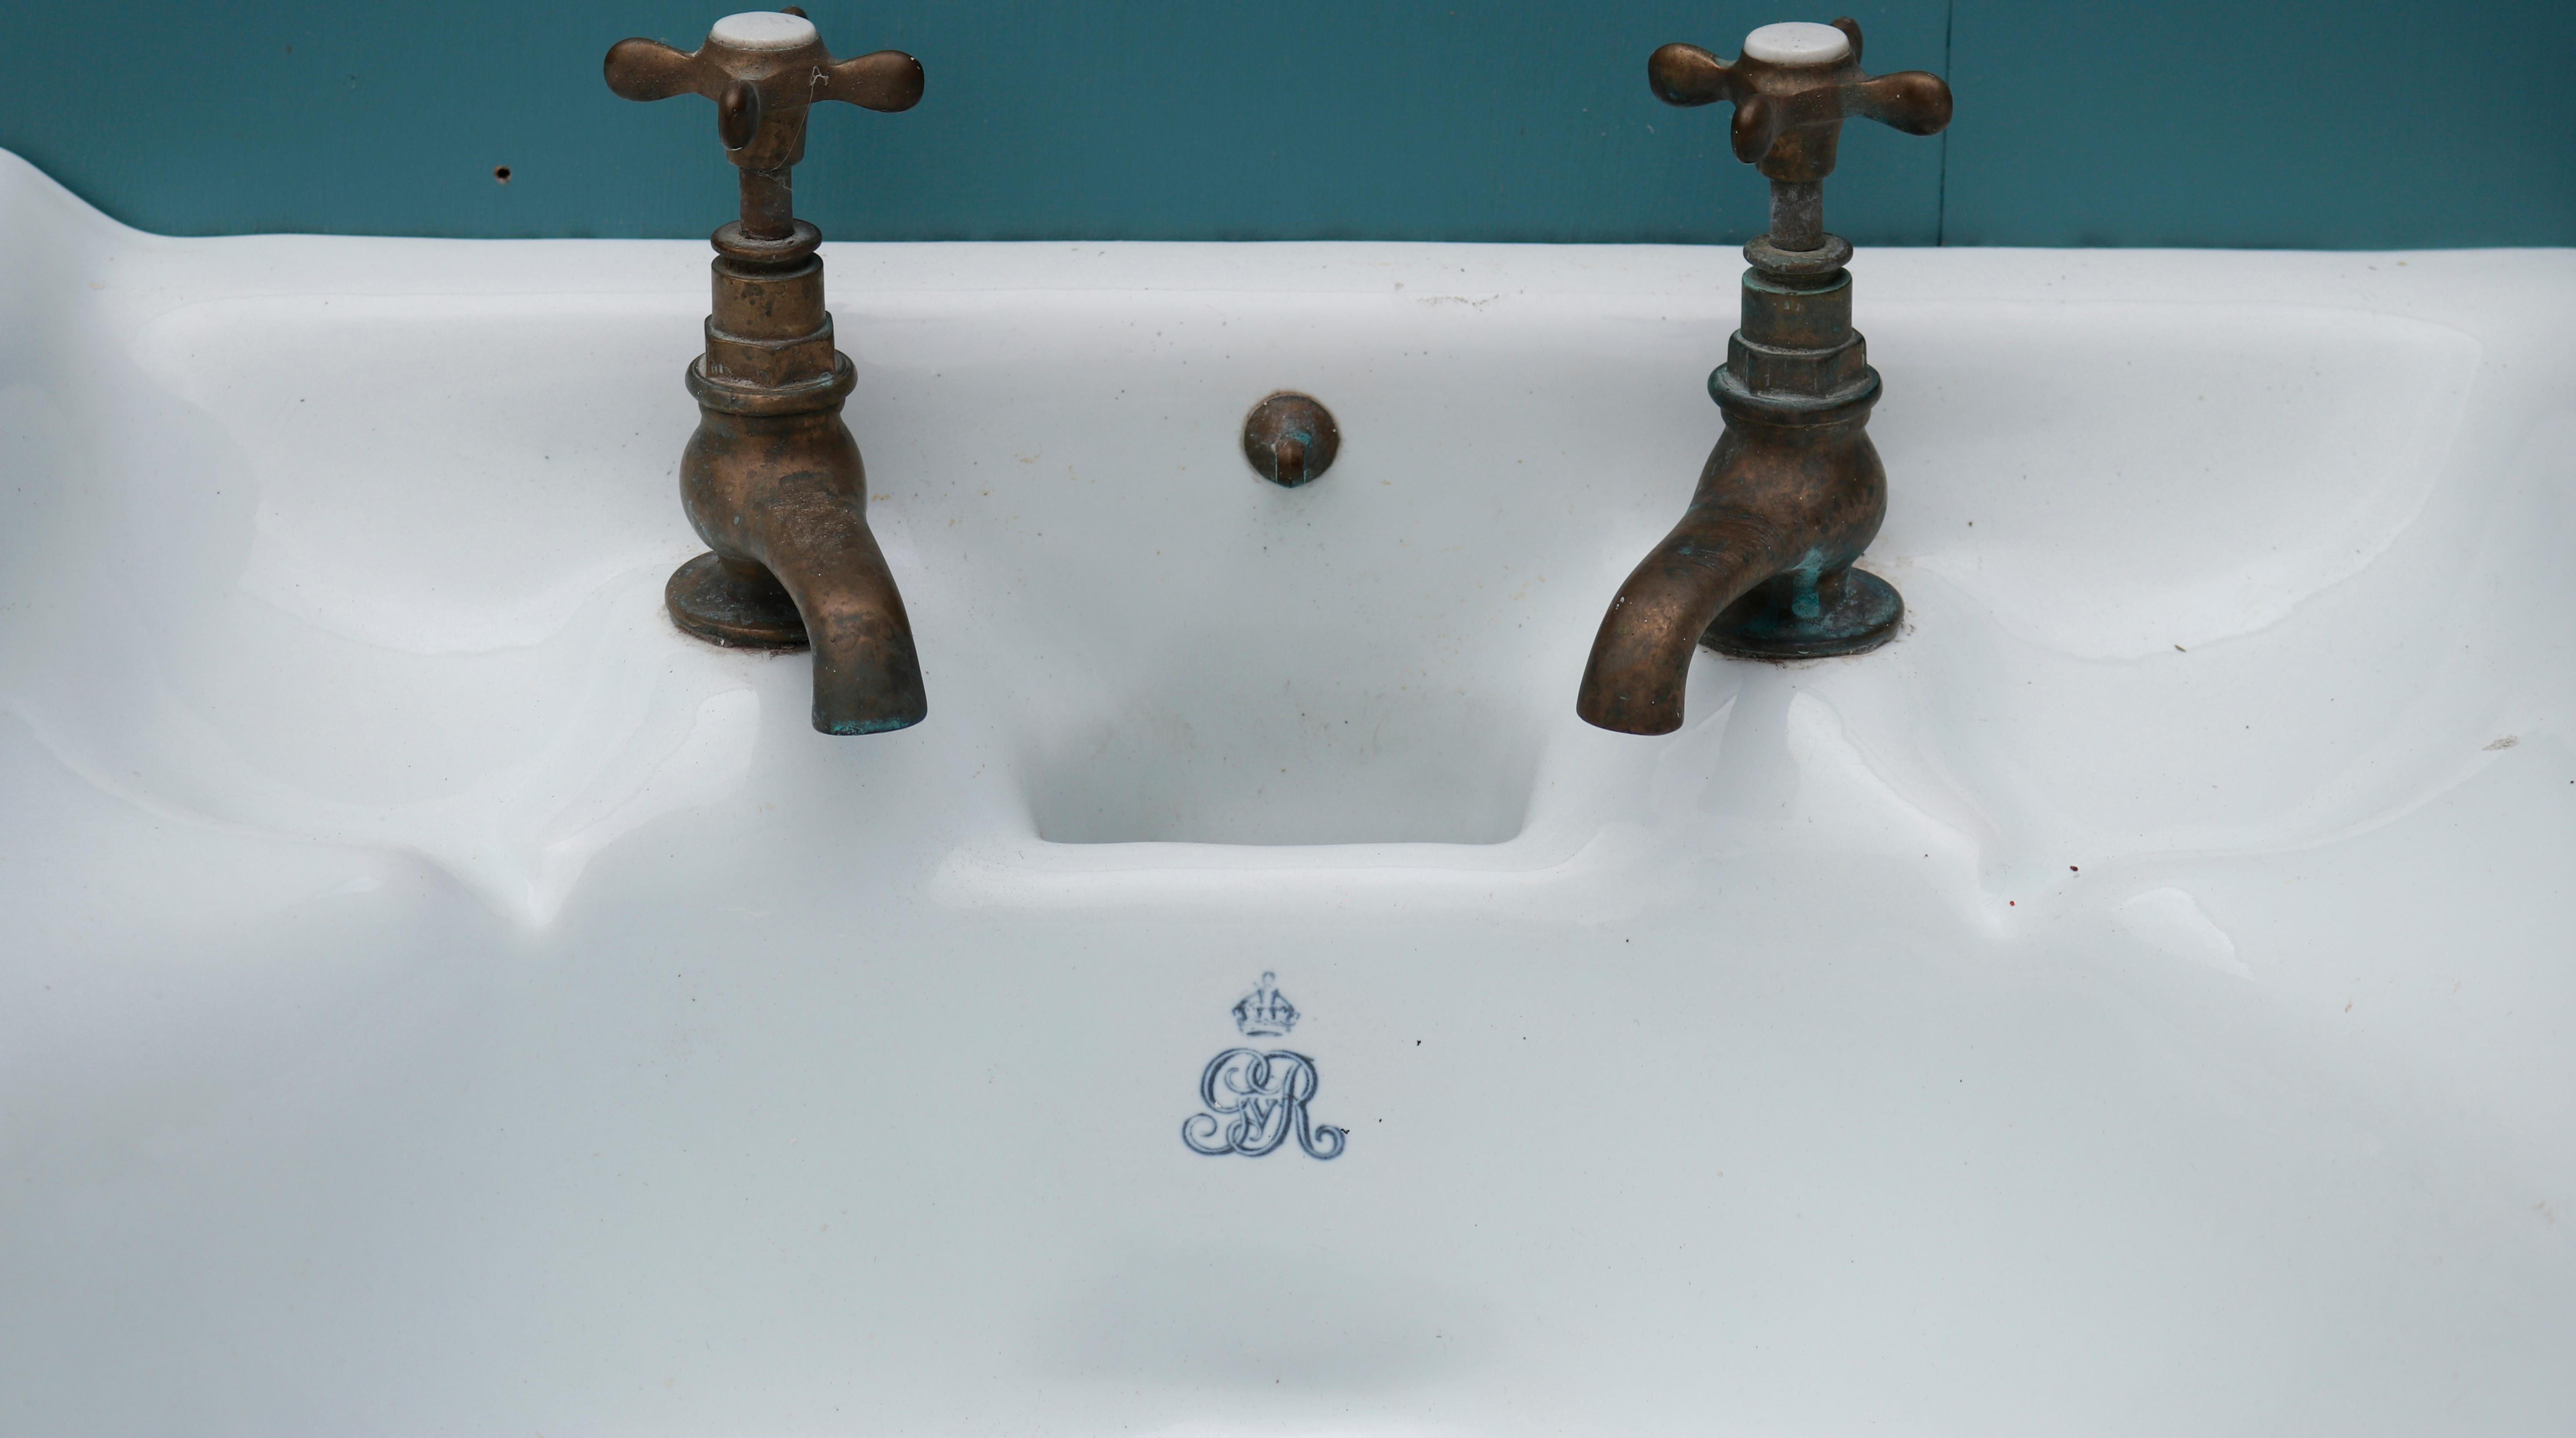 A double sink manufactured by Dent and Hellyer Ltd. based in 35 Red Lion Square, London.

The basins are stamped with the monogram of King George V, suggesting they were removed from a government building. Supplied with a modern steel stand.